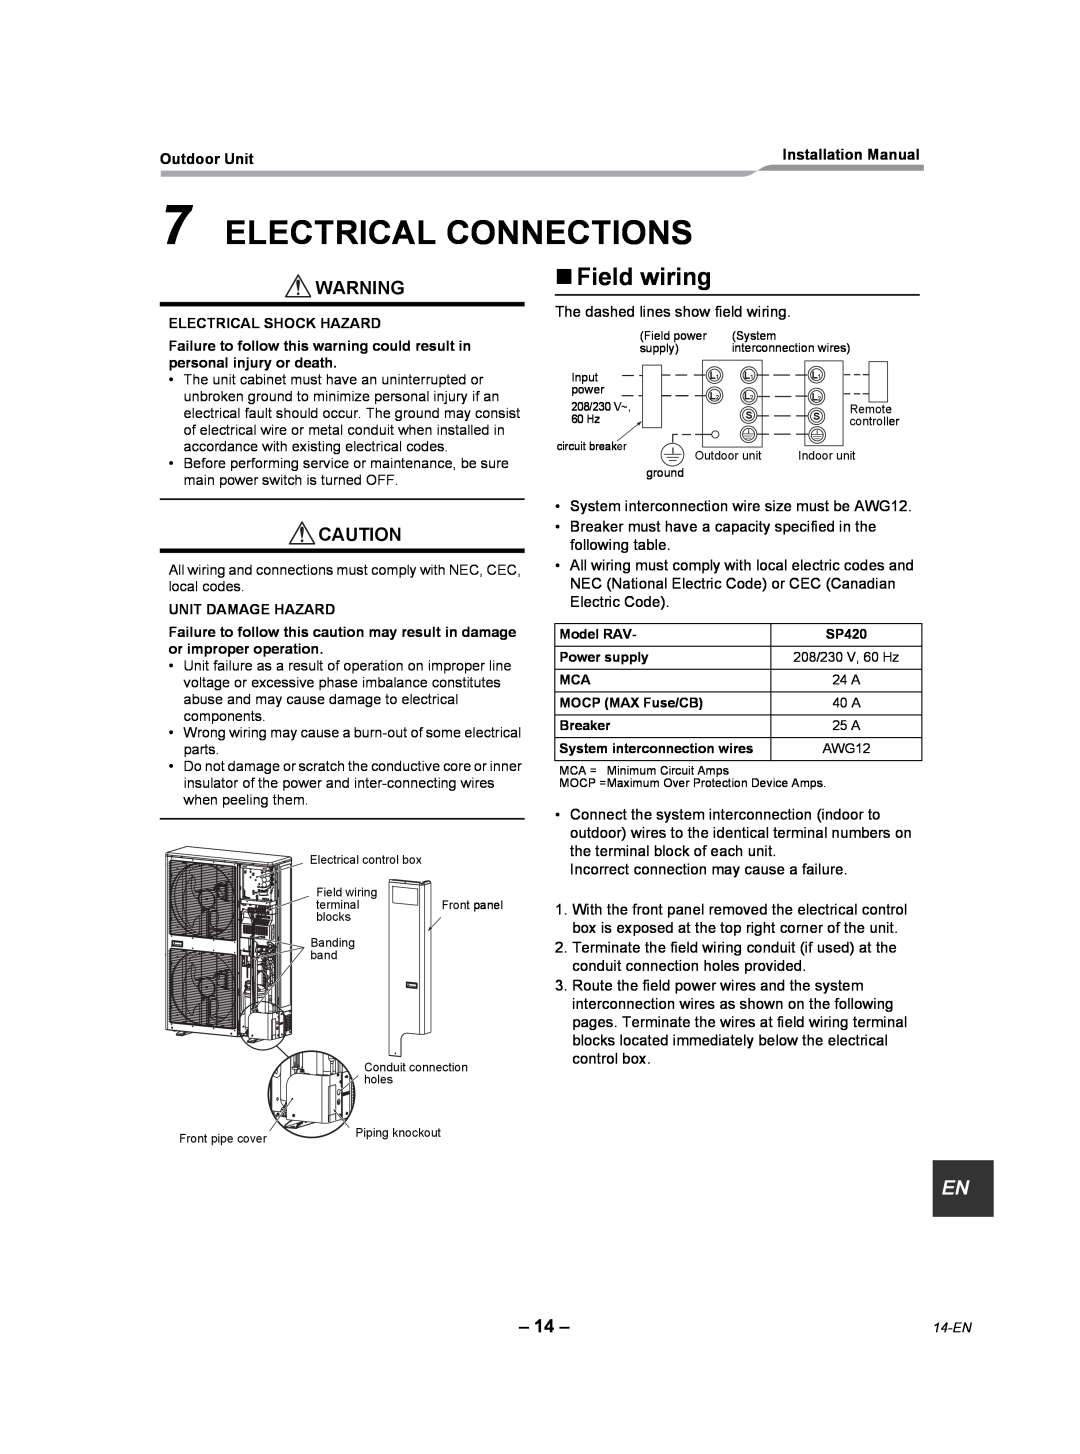 Toshiba RAV-SP360AT2-UL, RAV-SP300AT2-UL, RAV-SP420AT2-UL installation manual Electrical Connections, „Field wiring 